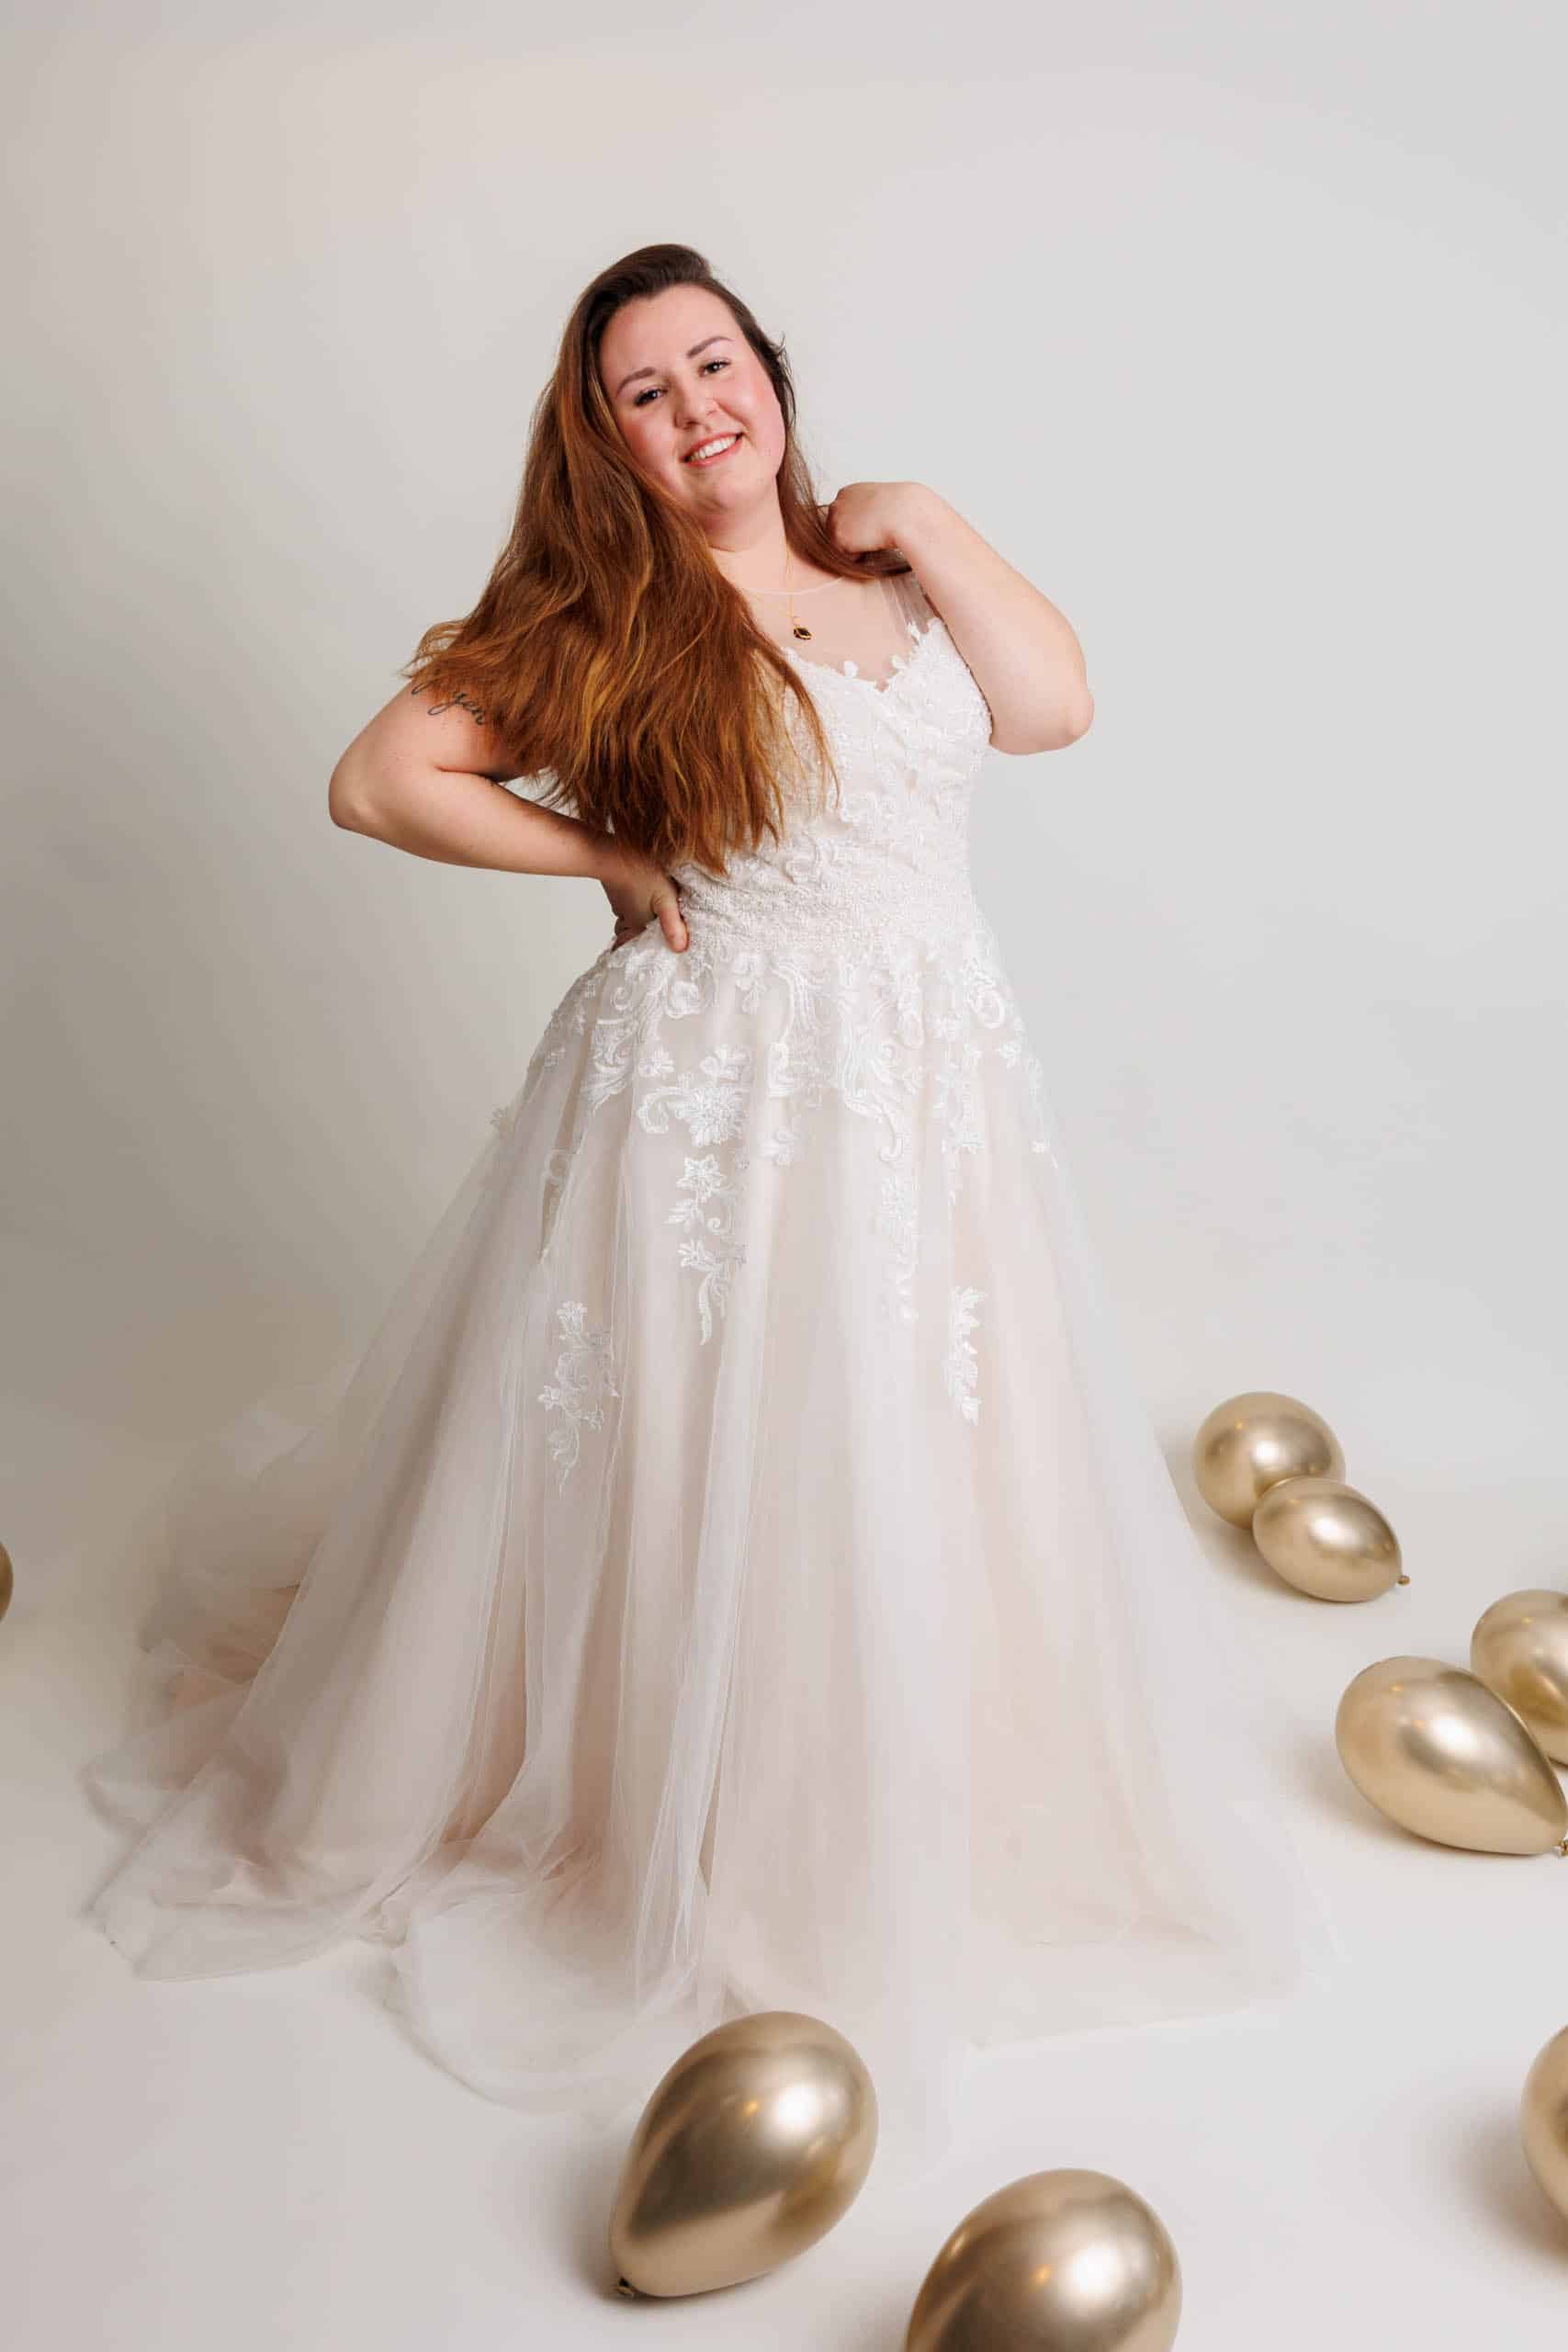 A woman in a wedding dress poses with gold balloons while trying on wedding dresses for fun.